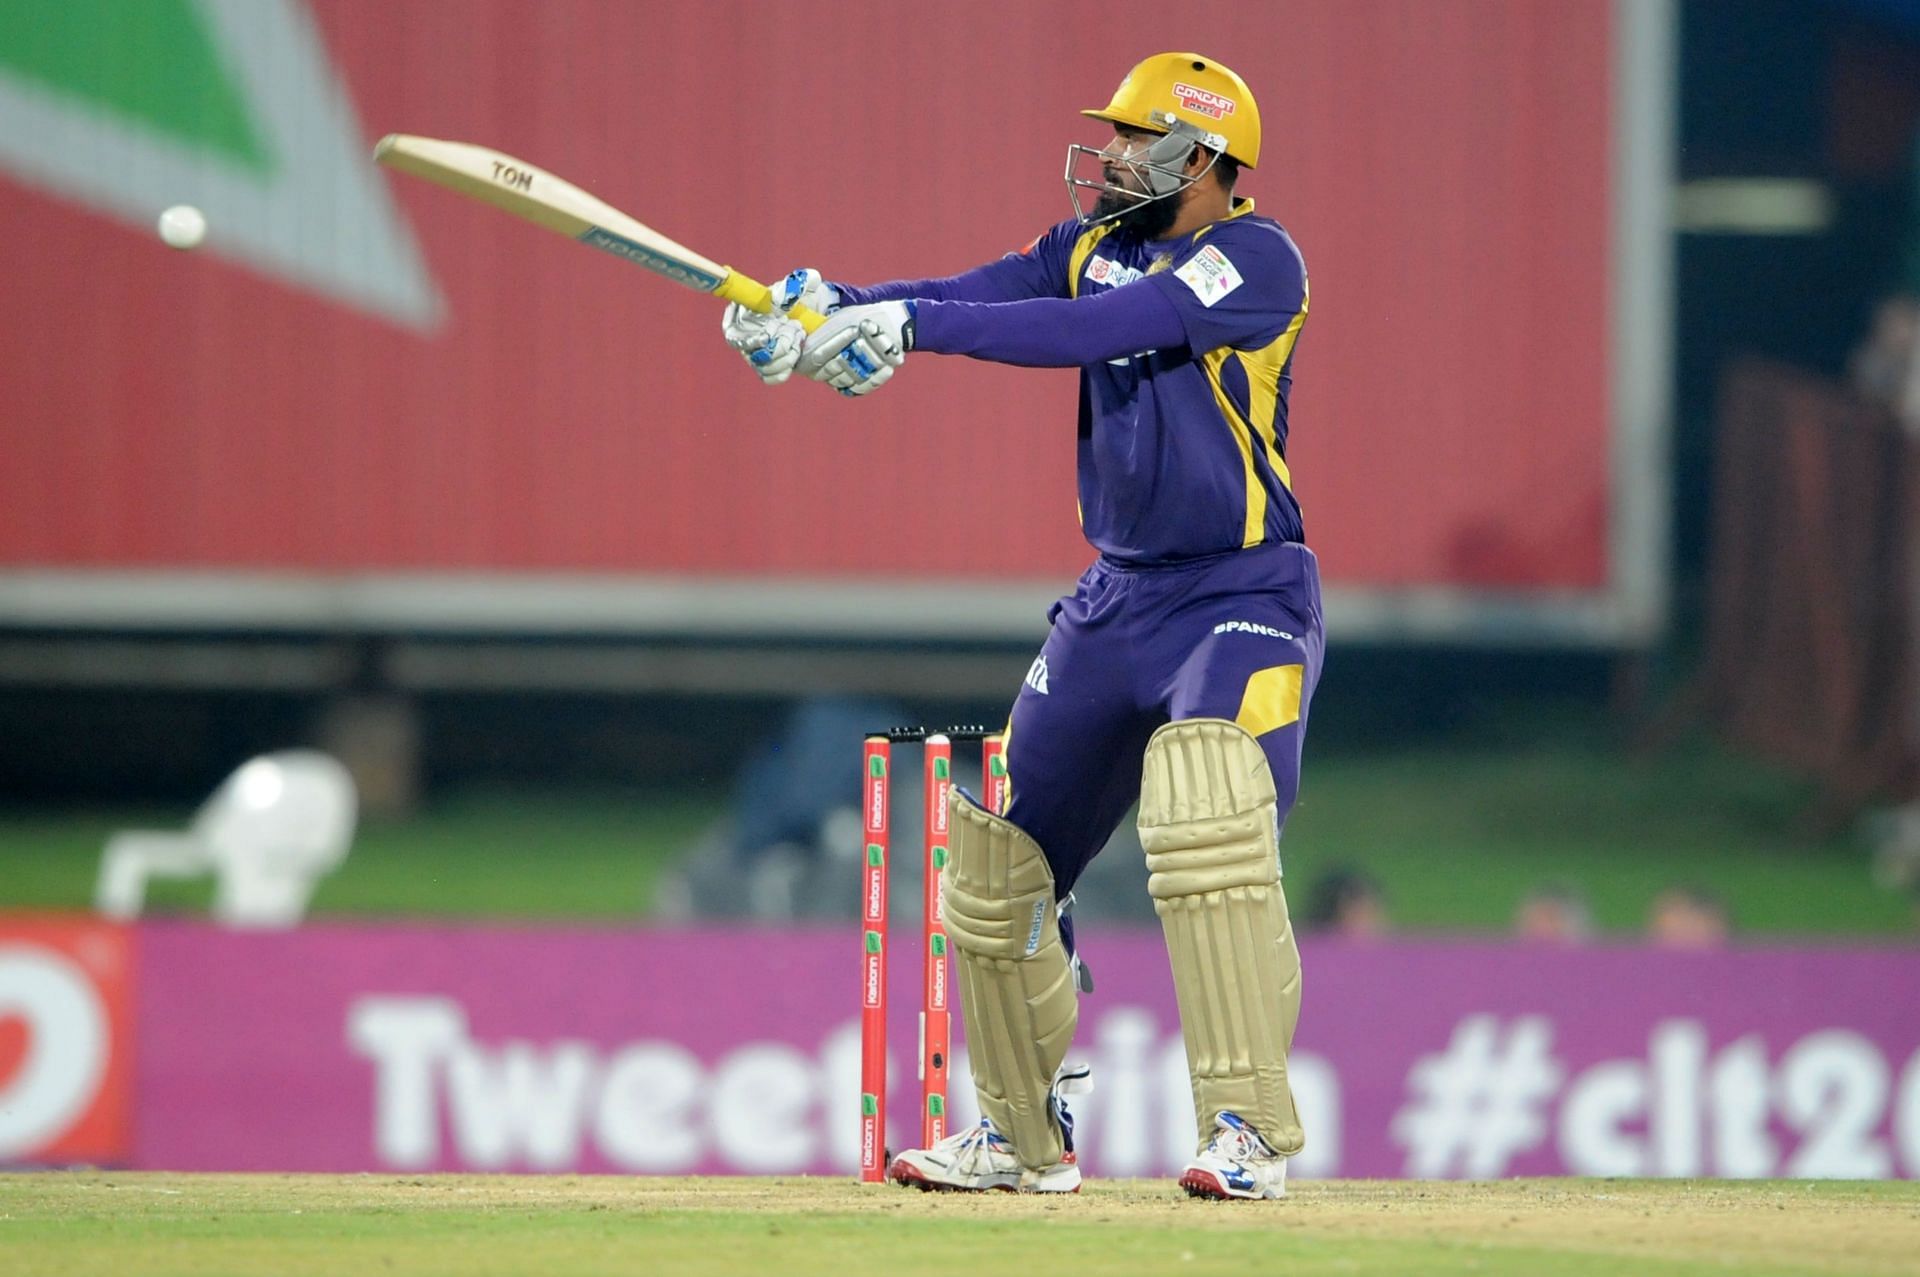 Yusuf Pathan was one of the best players for the Kolkata Knight Riders